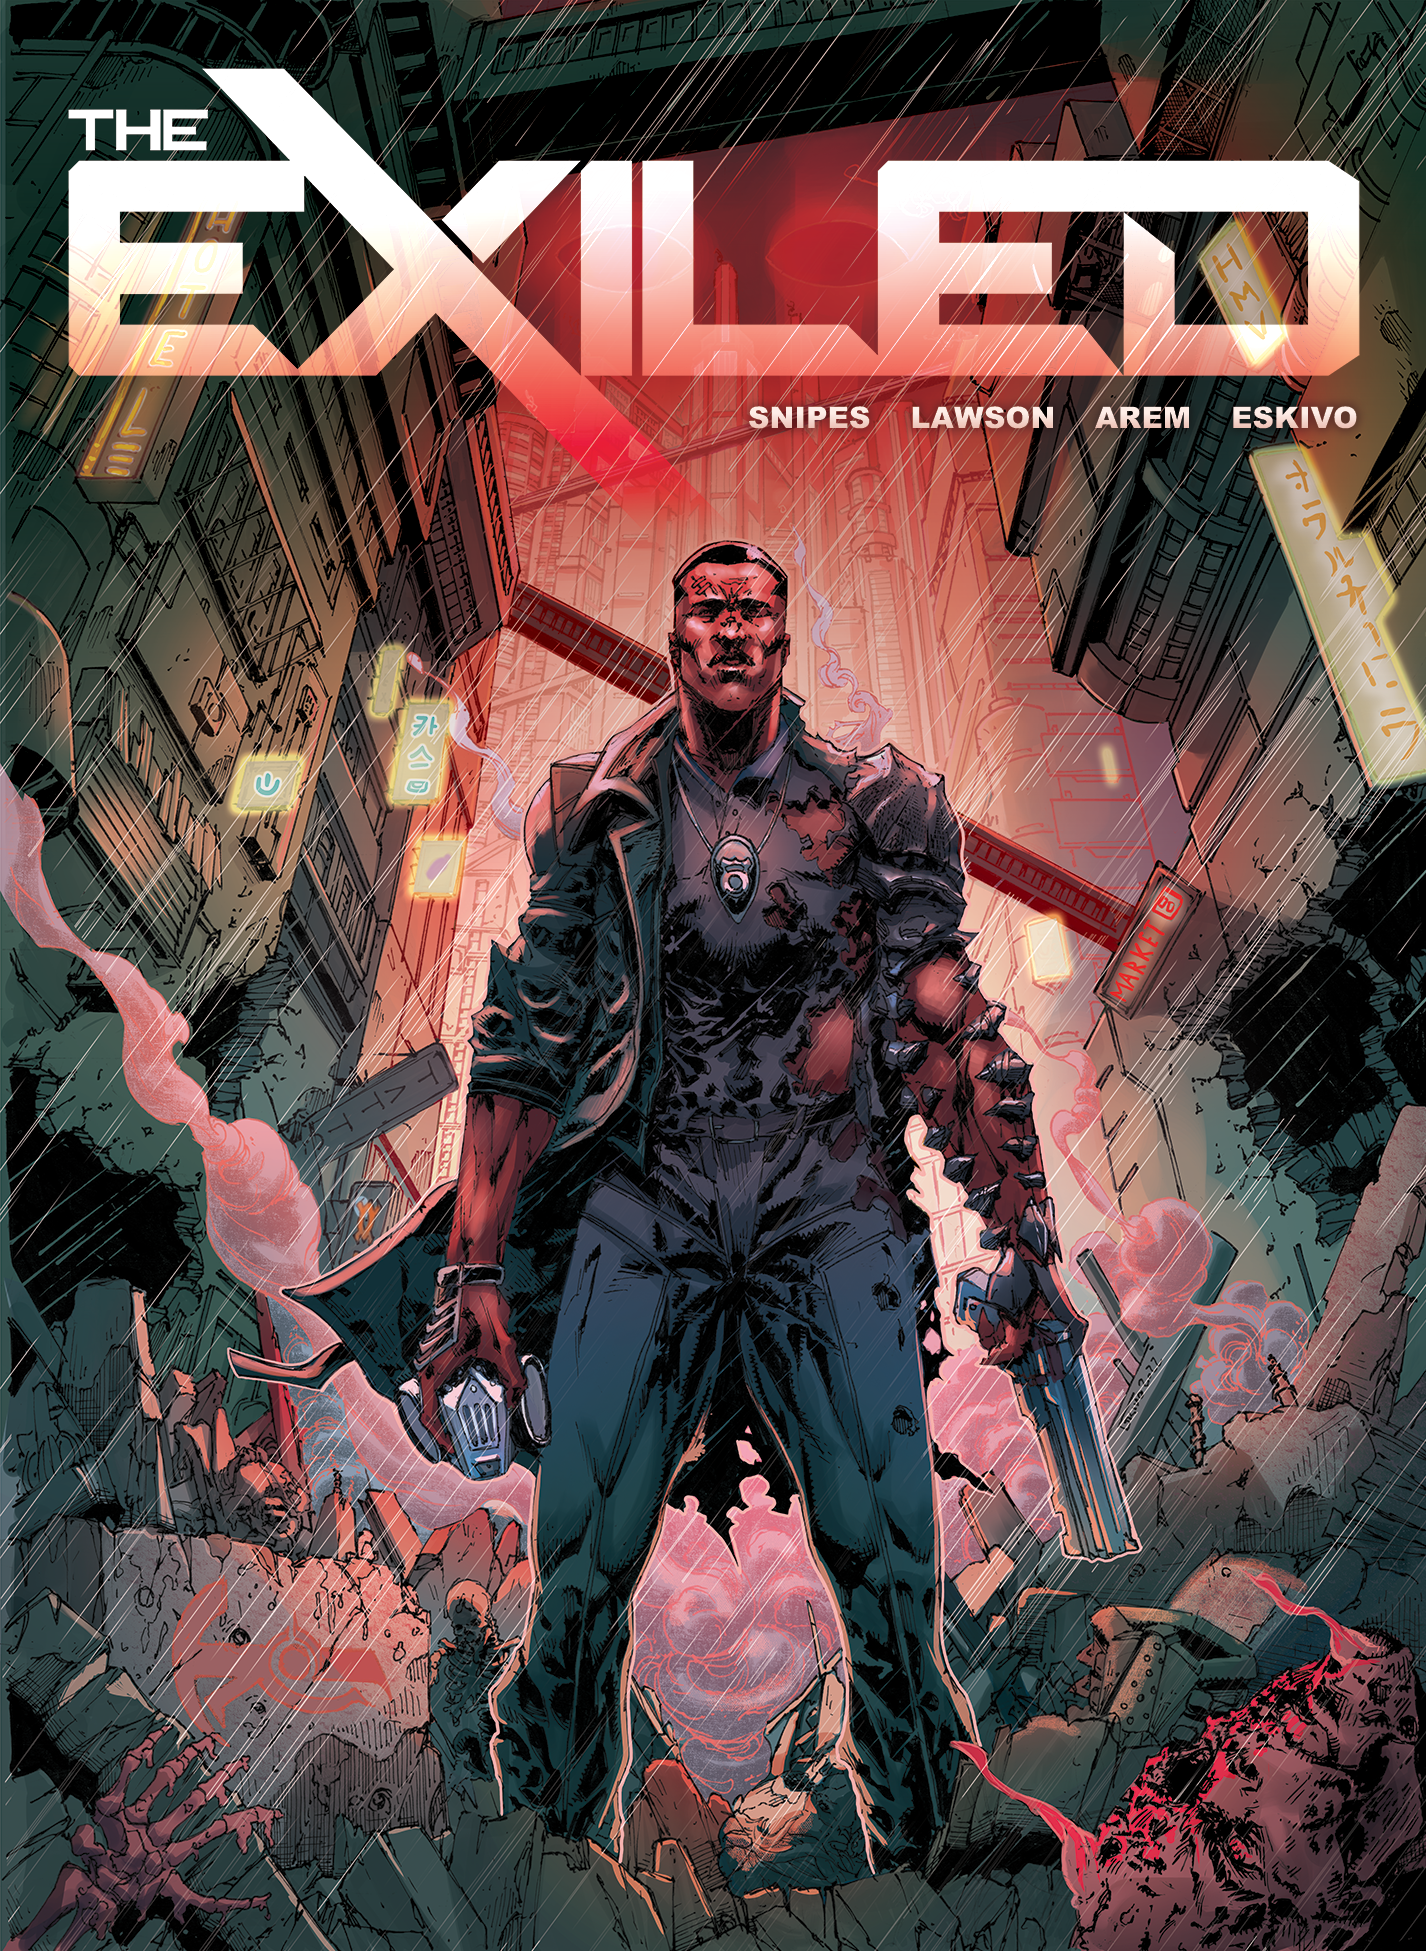 Wesley Snipes Working on Graphic Novel The Exiled